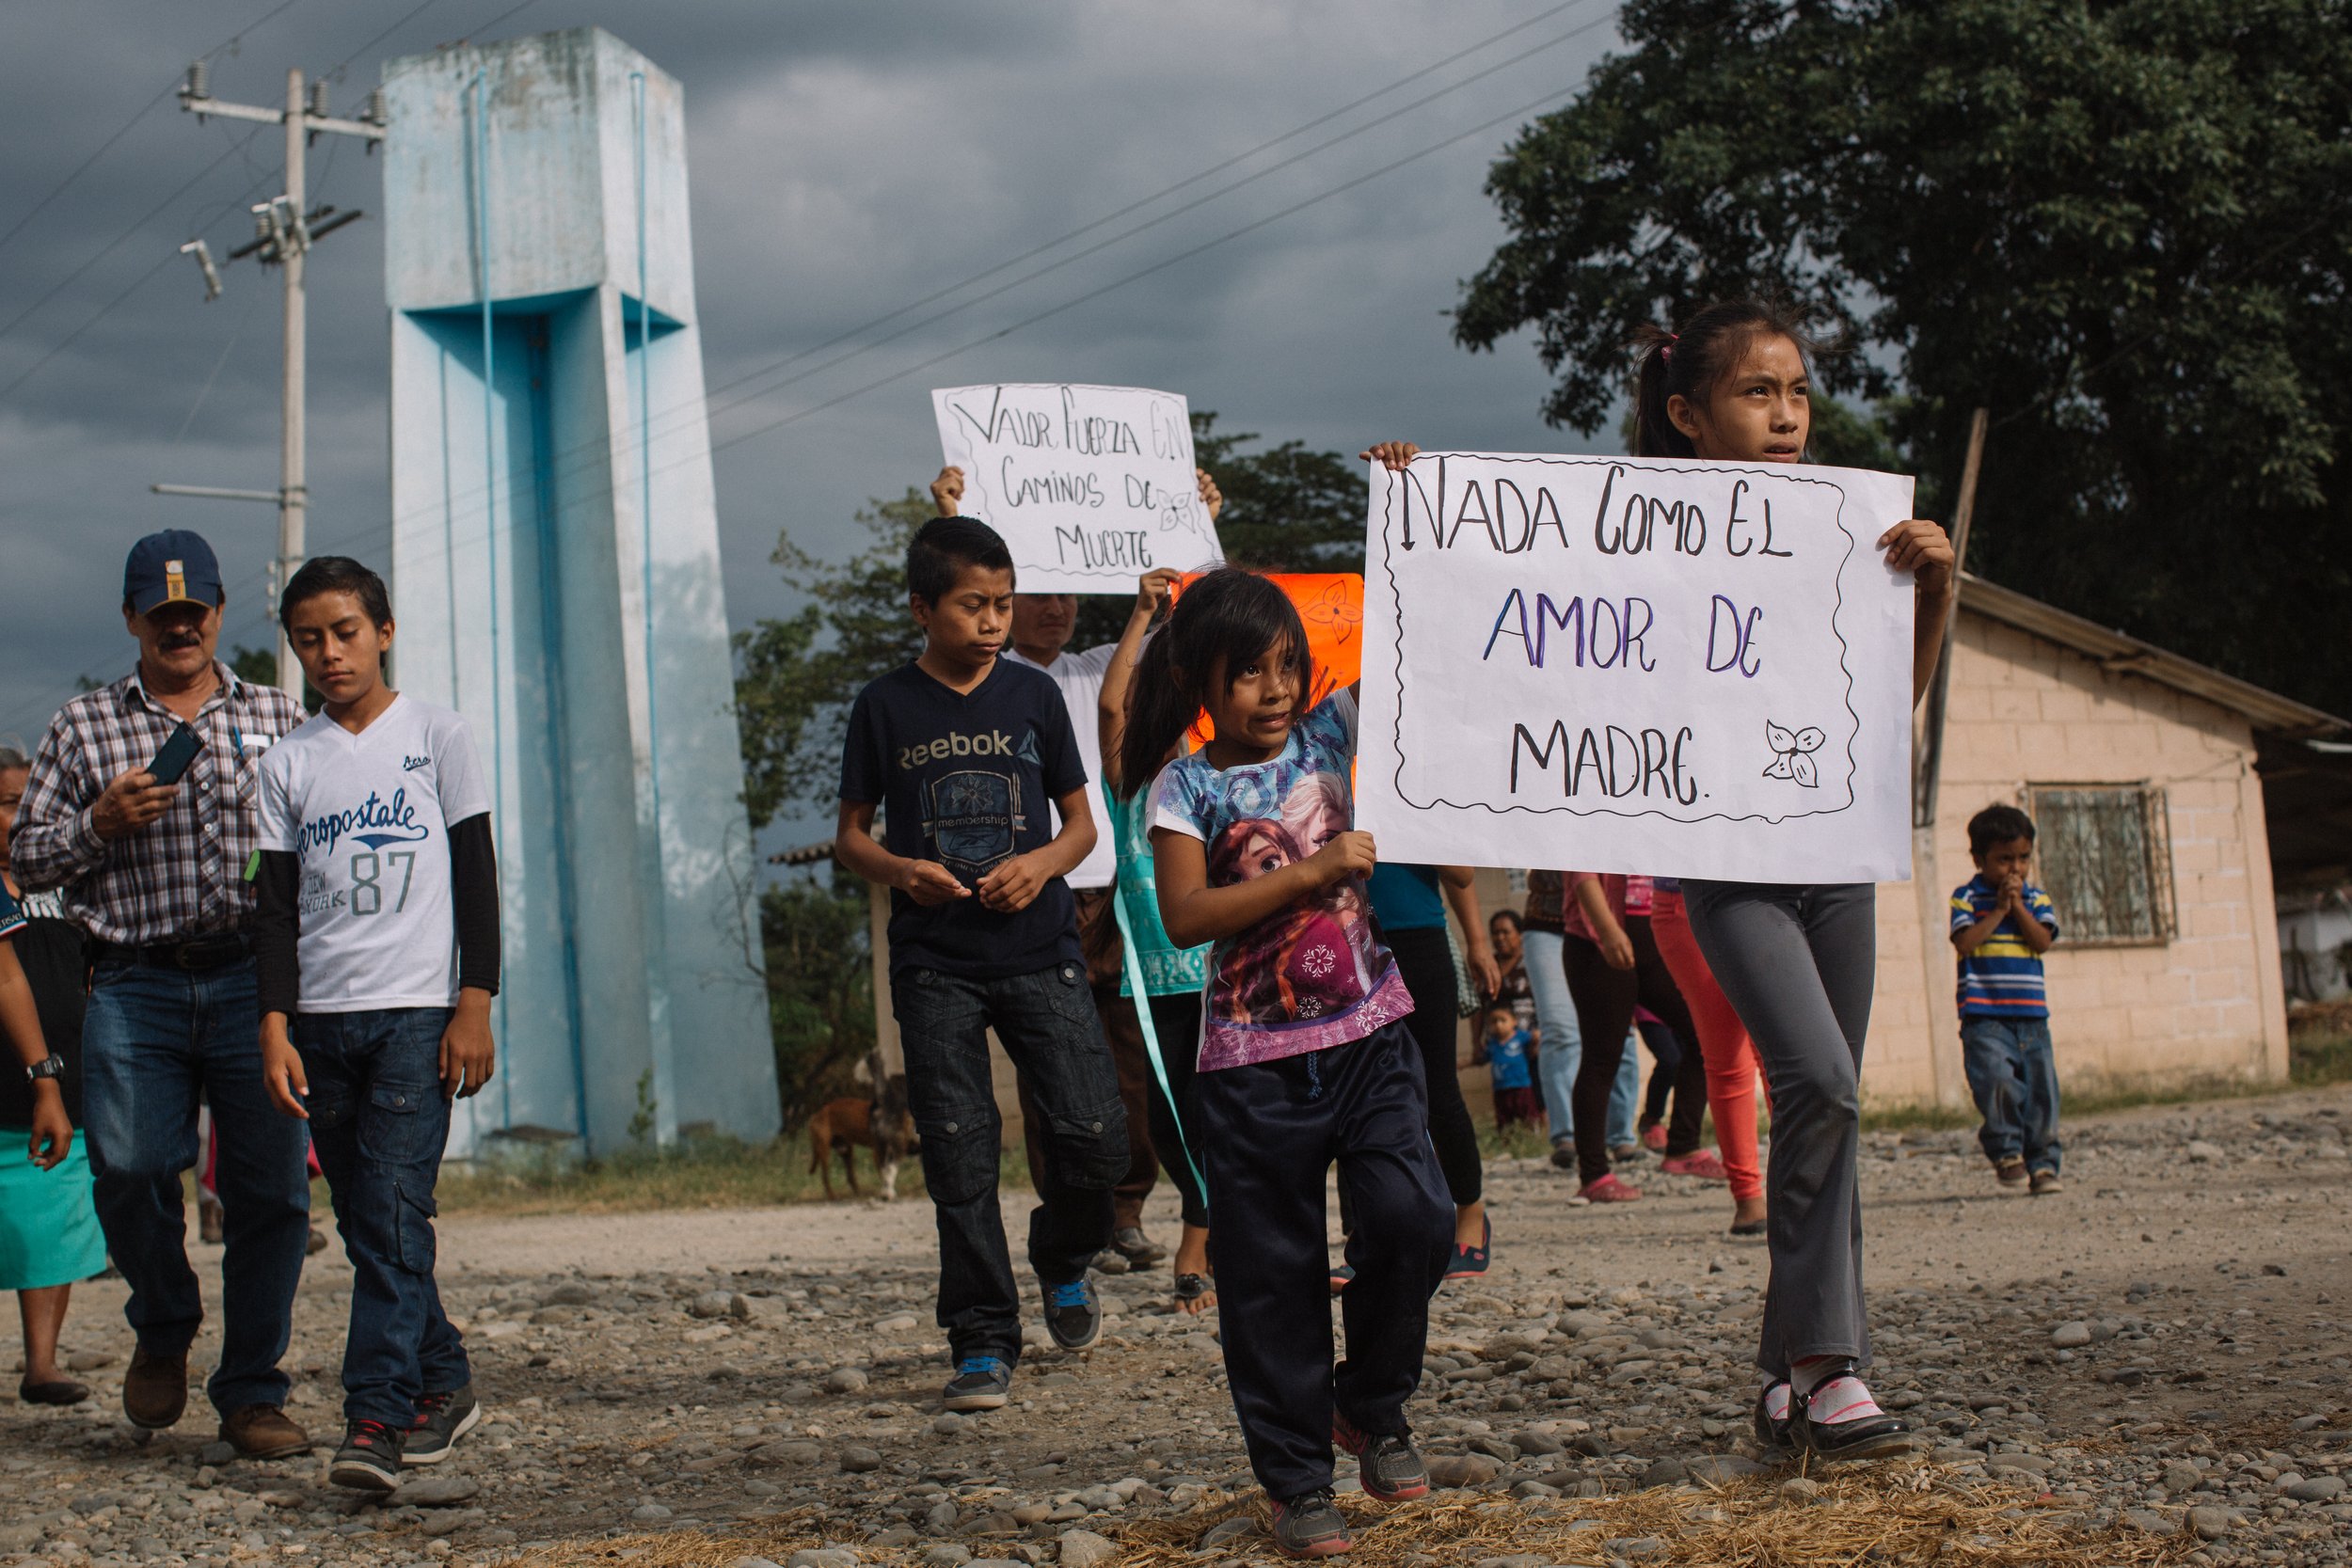  In a heartwarming scene, children from the community of Nueva Linda in Chiapas, Mexico, run out to greet the caravan of mothers with signs of encouragement. Nueva Linda is a common stop for migrants on their way north, and the community often hires 